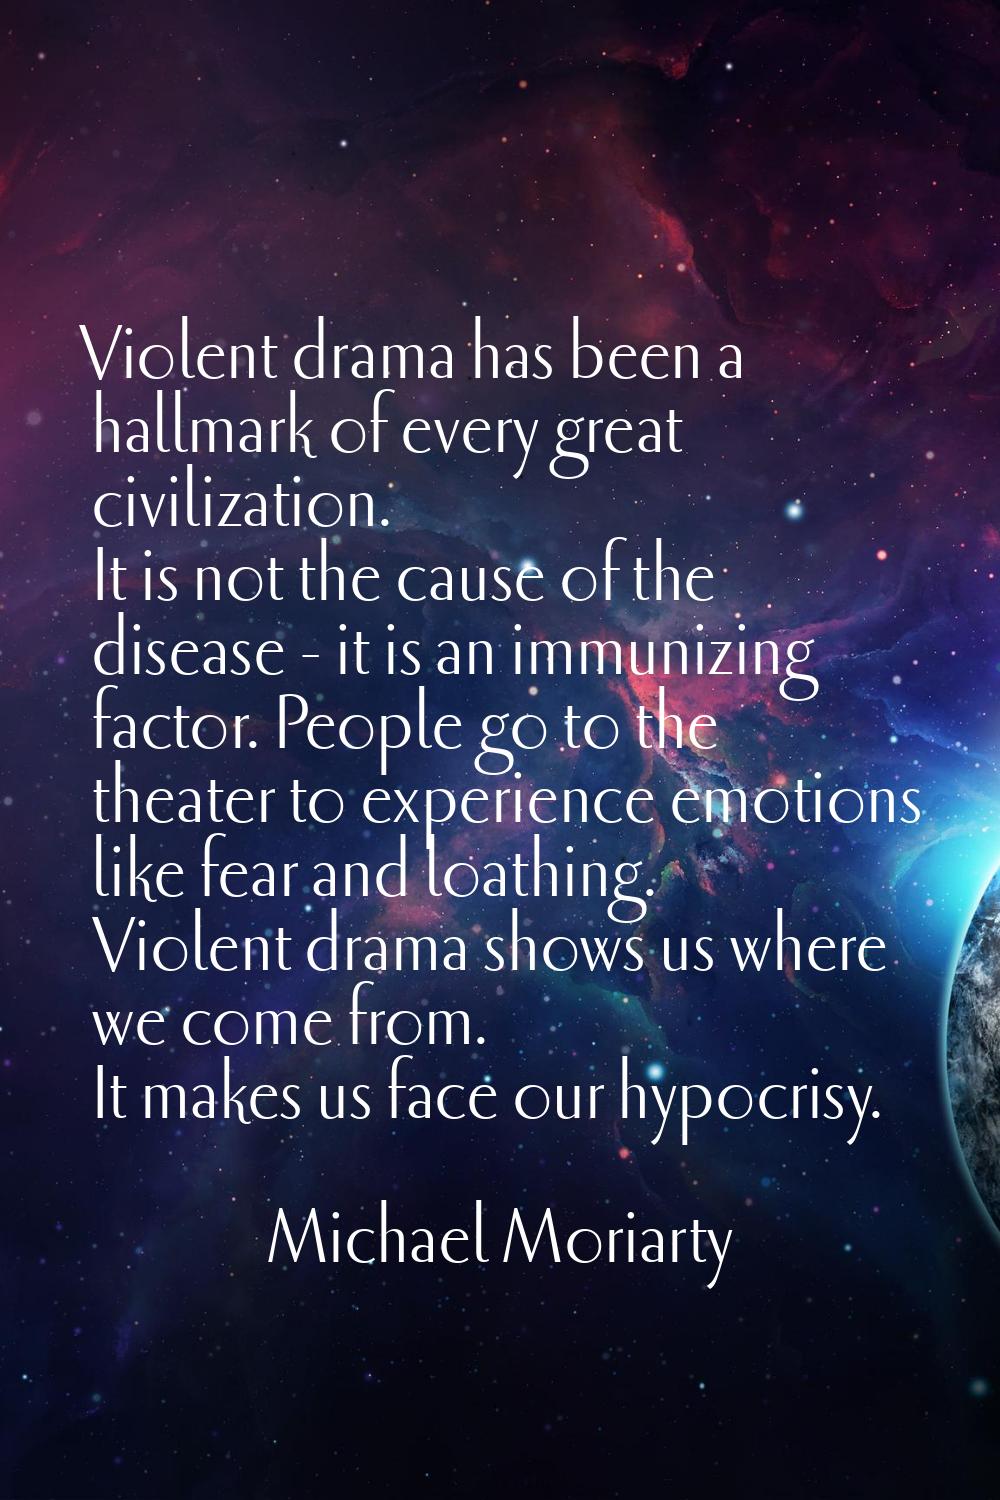 Violent drama has been a hallmark of every great civilization. It is not the cause of the disease -